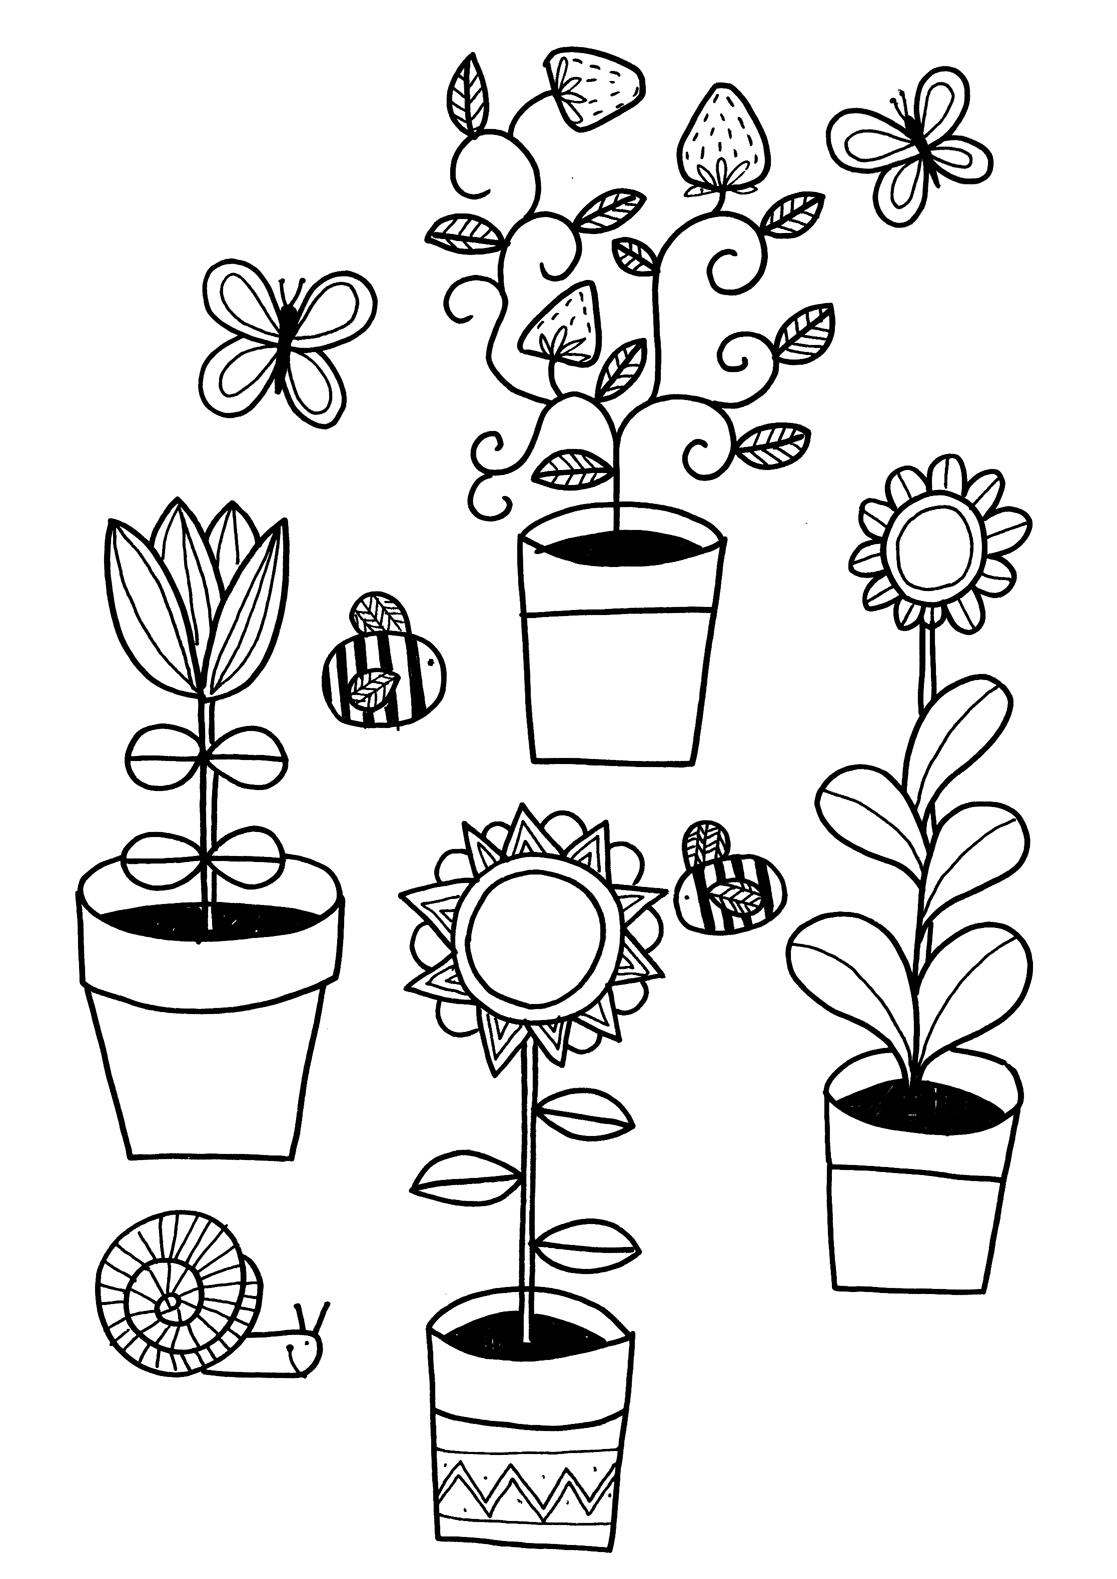 how seeds grow coloring pages